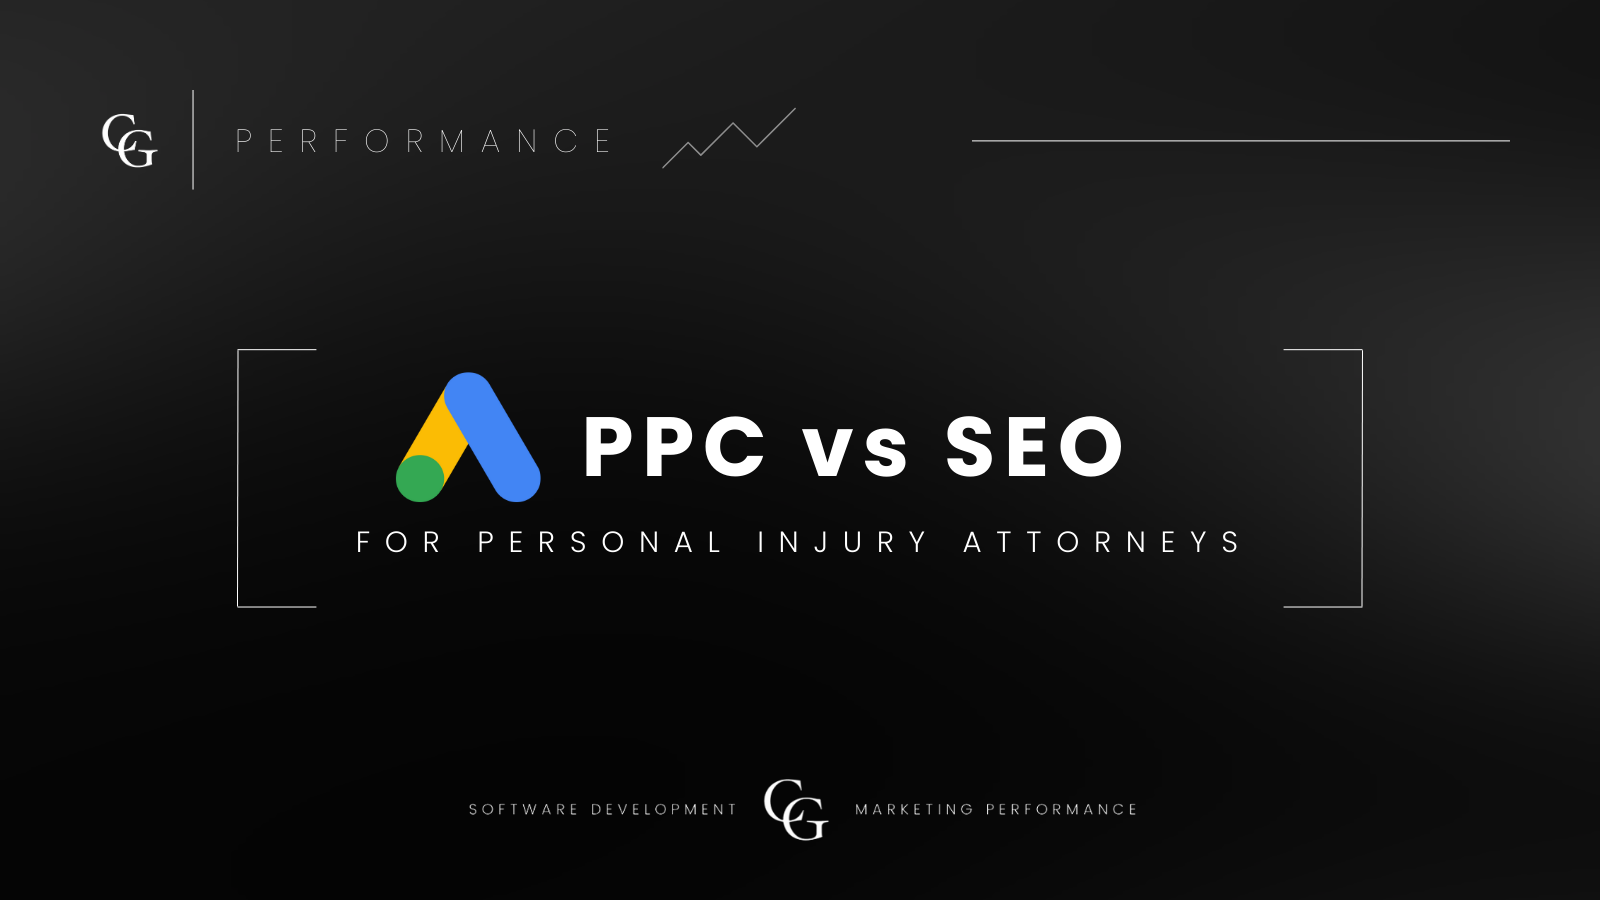 Google PPC vs SEO for Personal Injury Attorneys